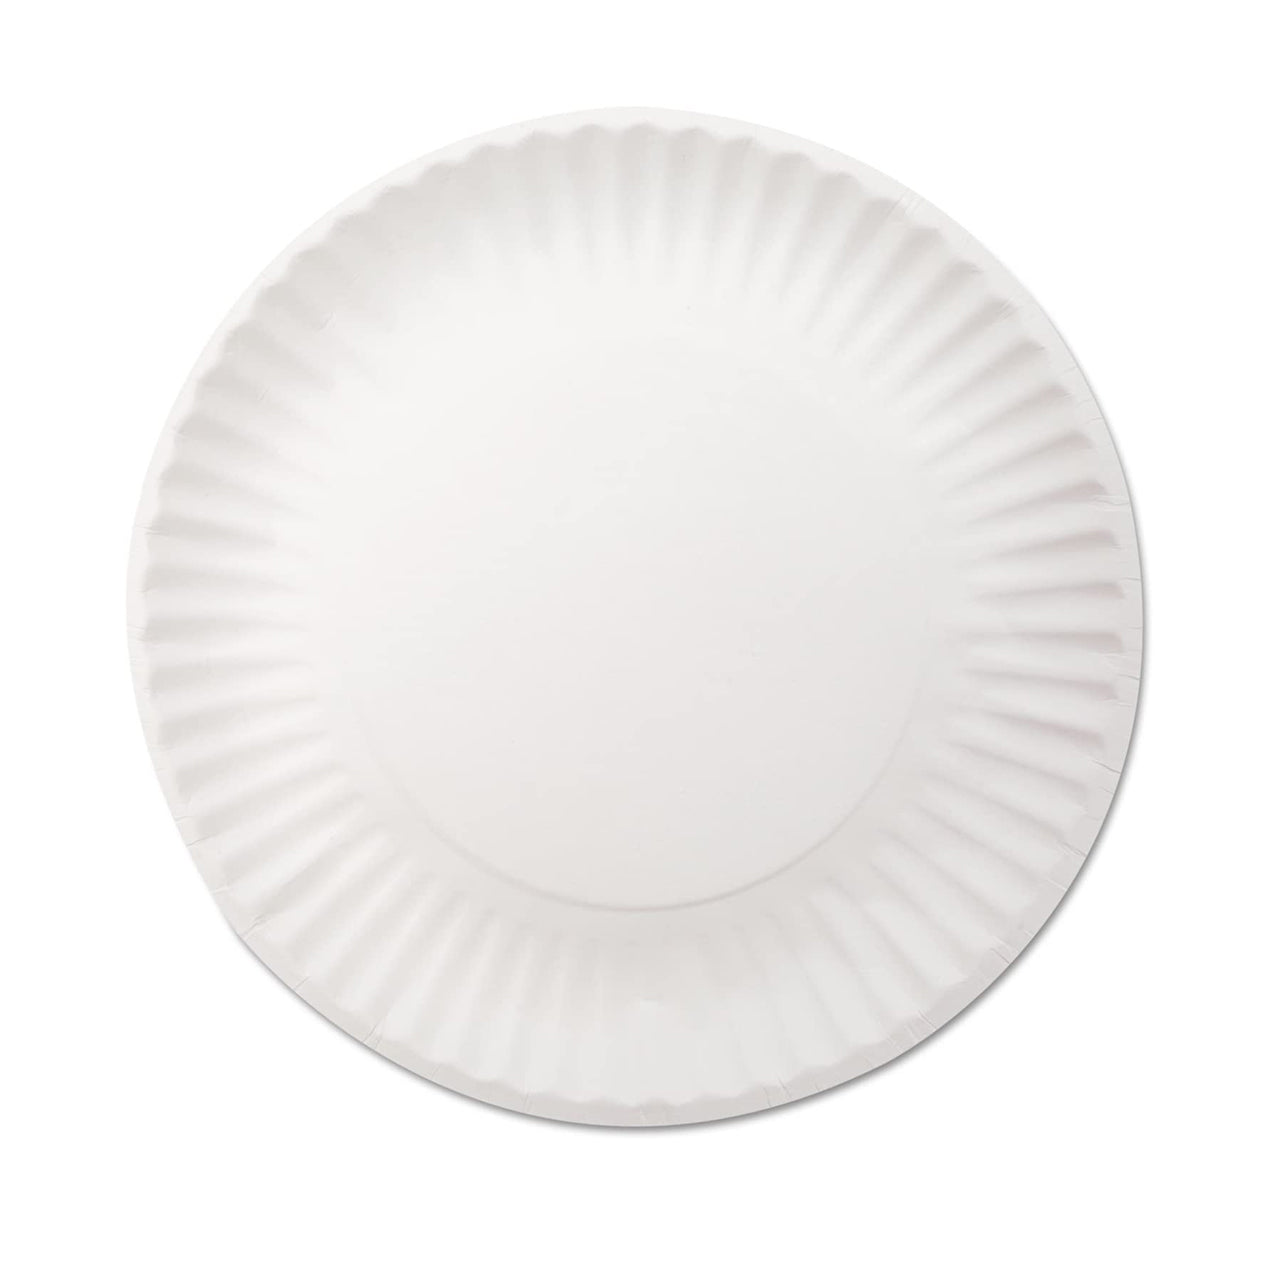 9 INCH 100CT UNCOATED PAPER PLATES 12/CS